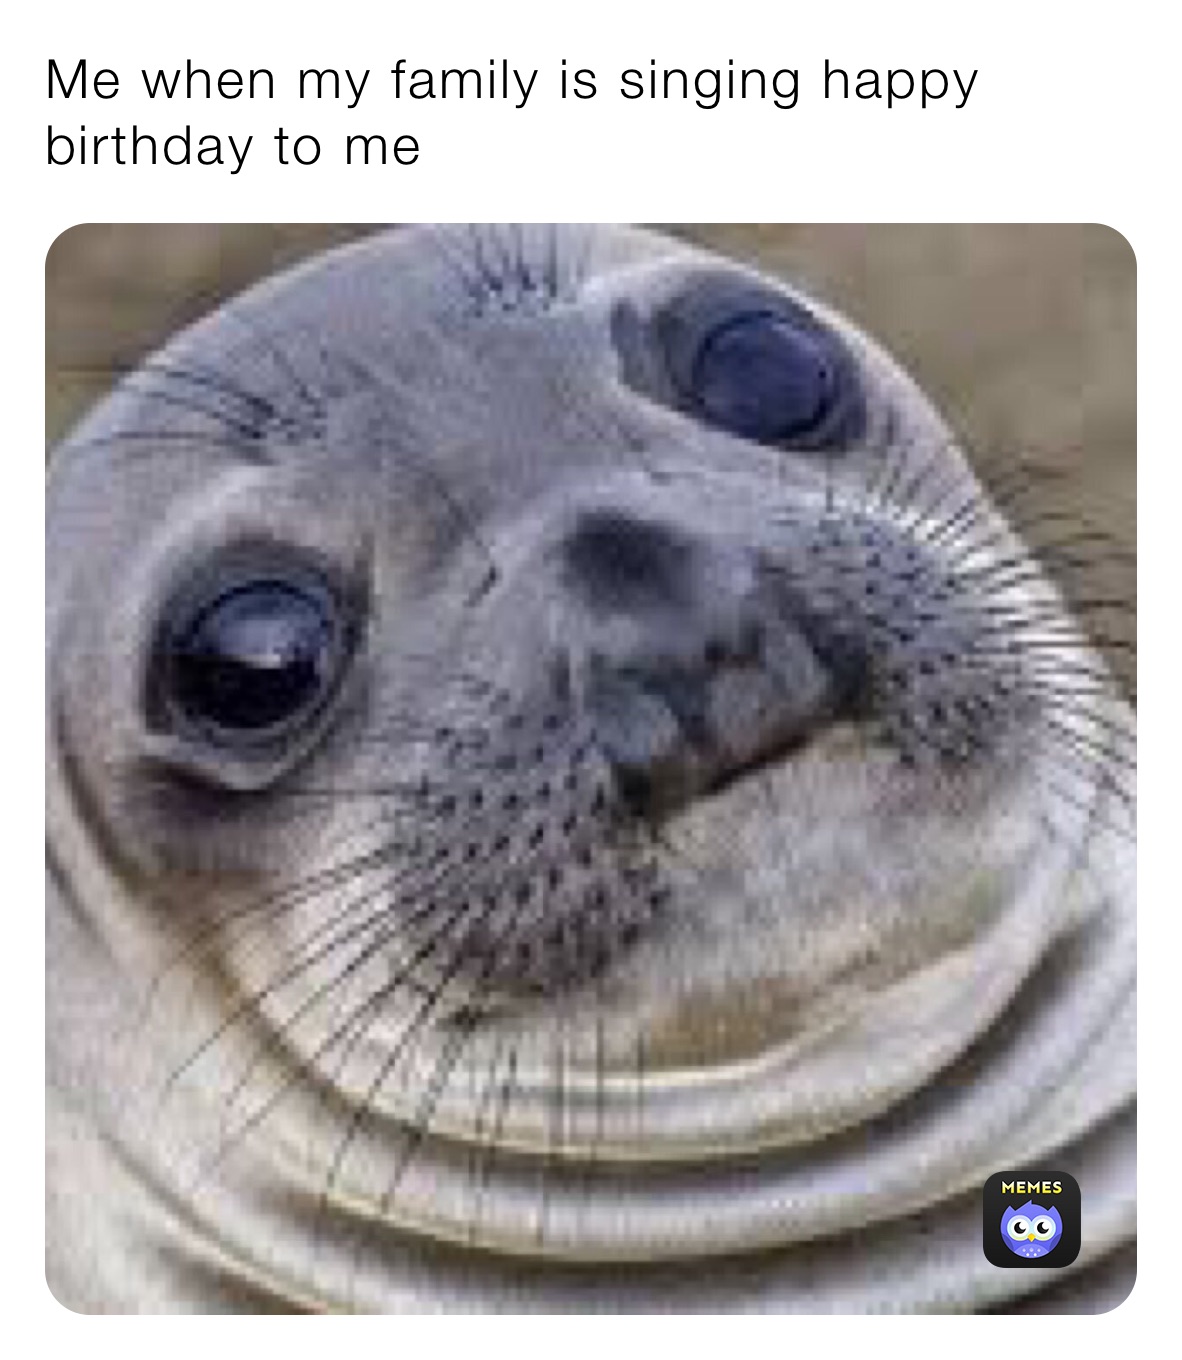 Me when my family is singing happy birthday to me